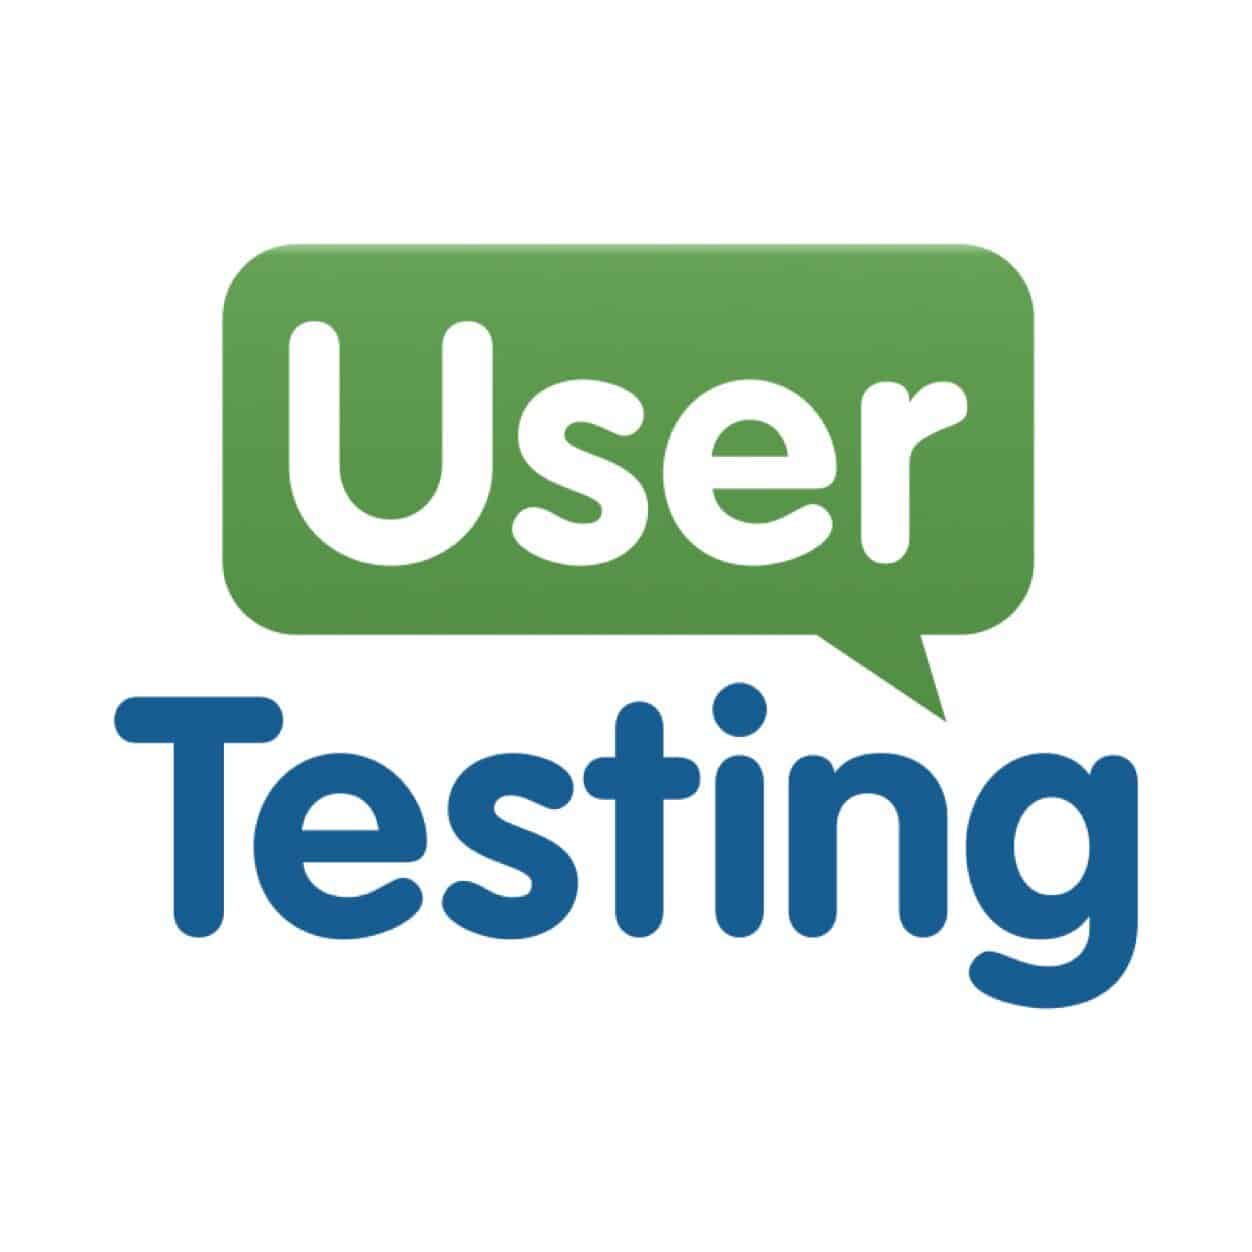 UserTesting Review: Get Paid $10 to Test Websites from Home